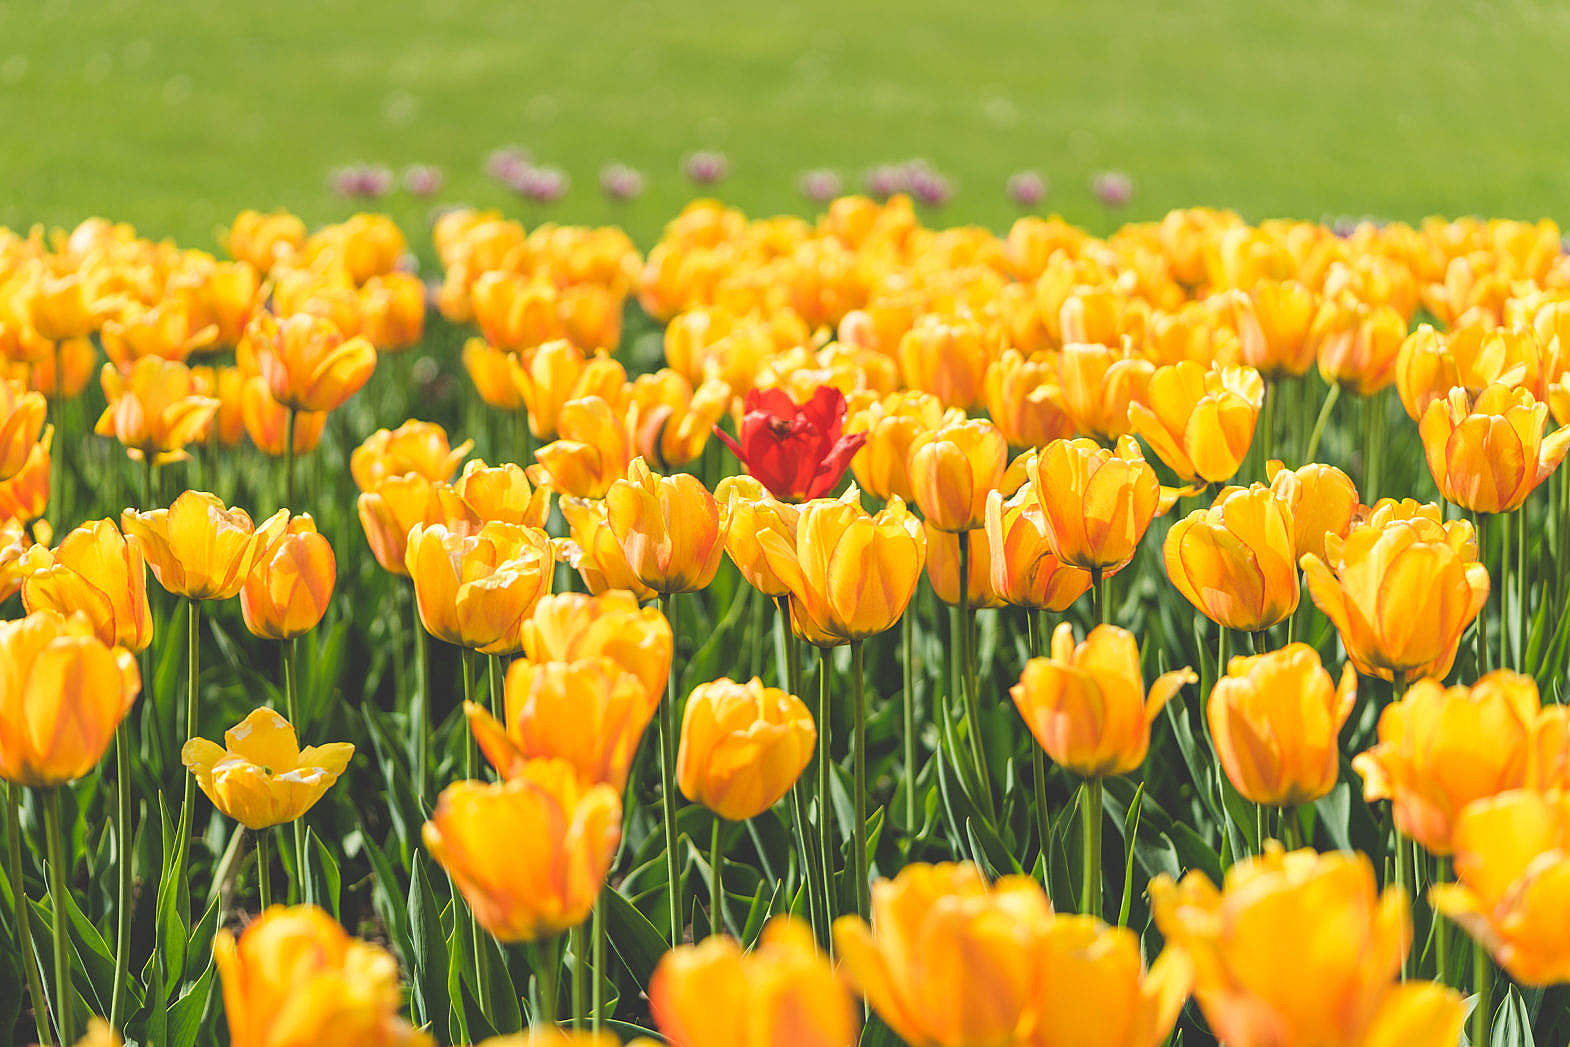 One Red Tulip Flower Surrounded by Yellow Tulips Free Stock Photo ...